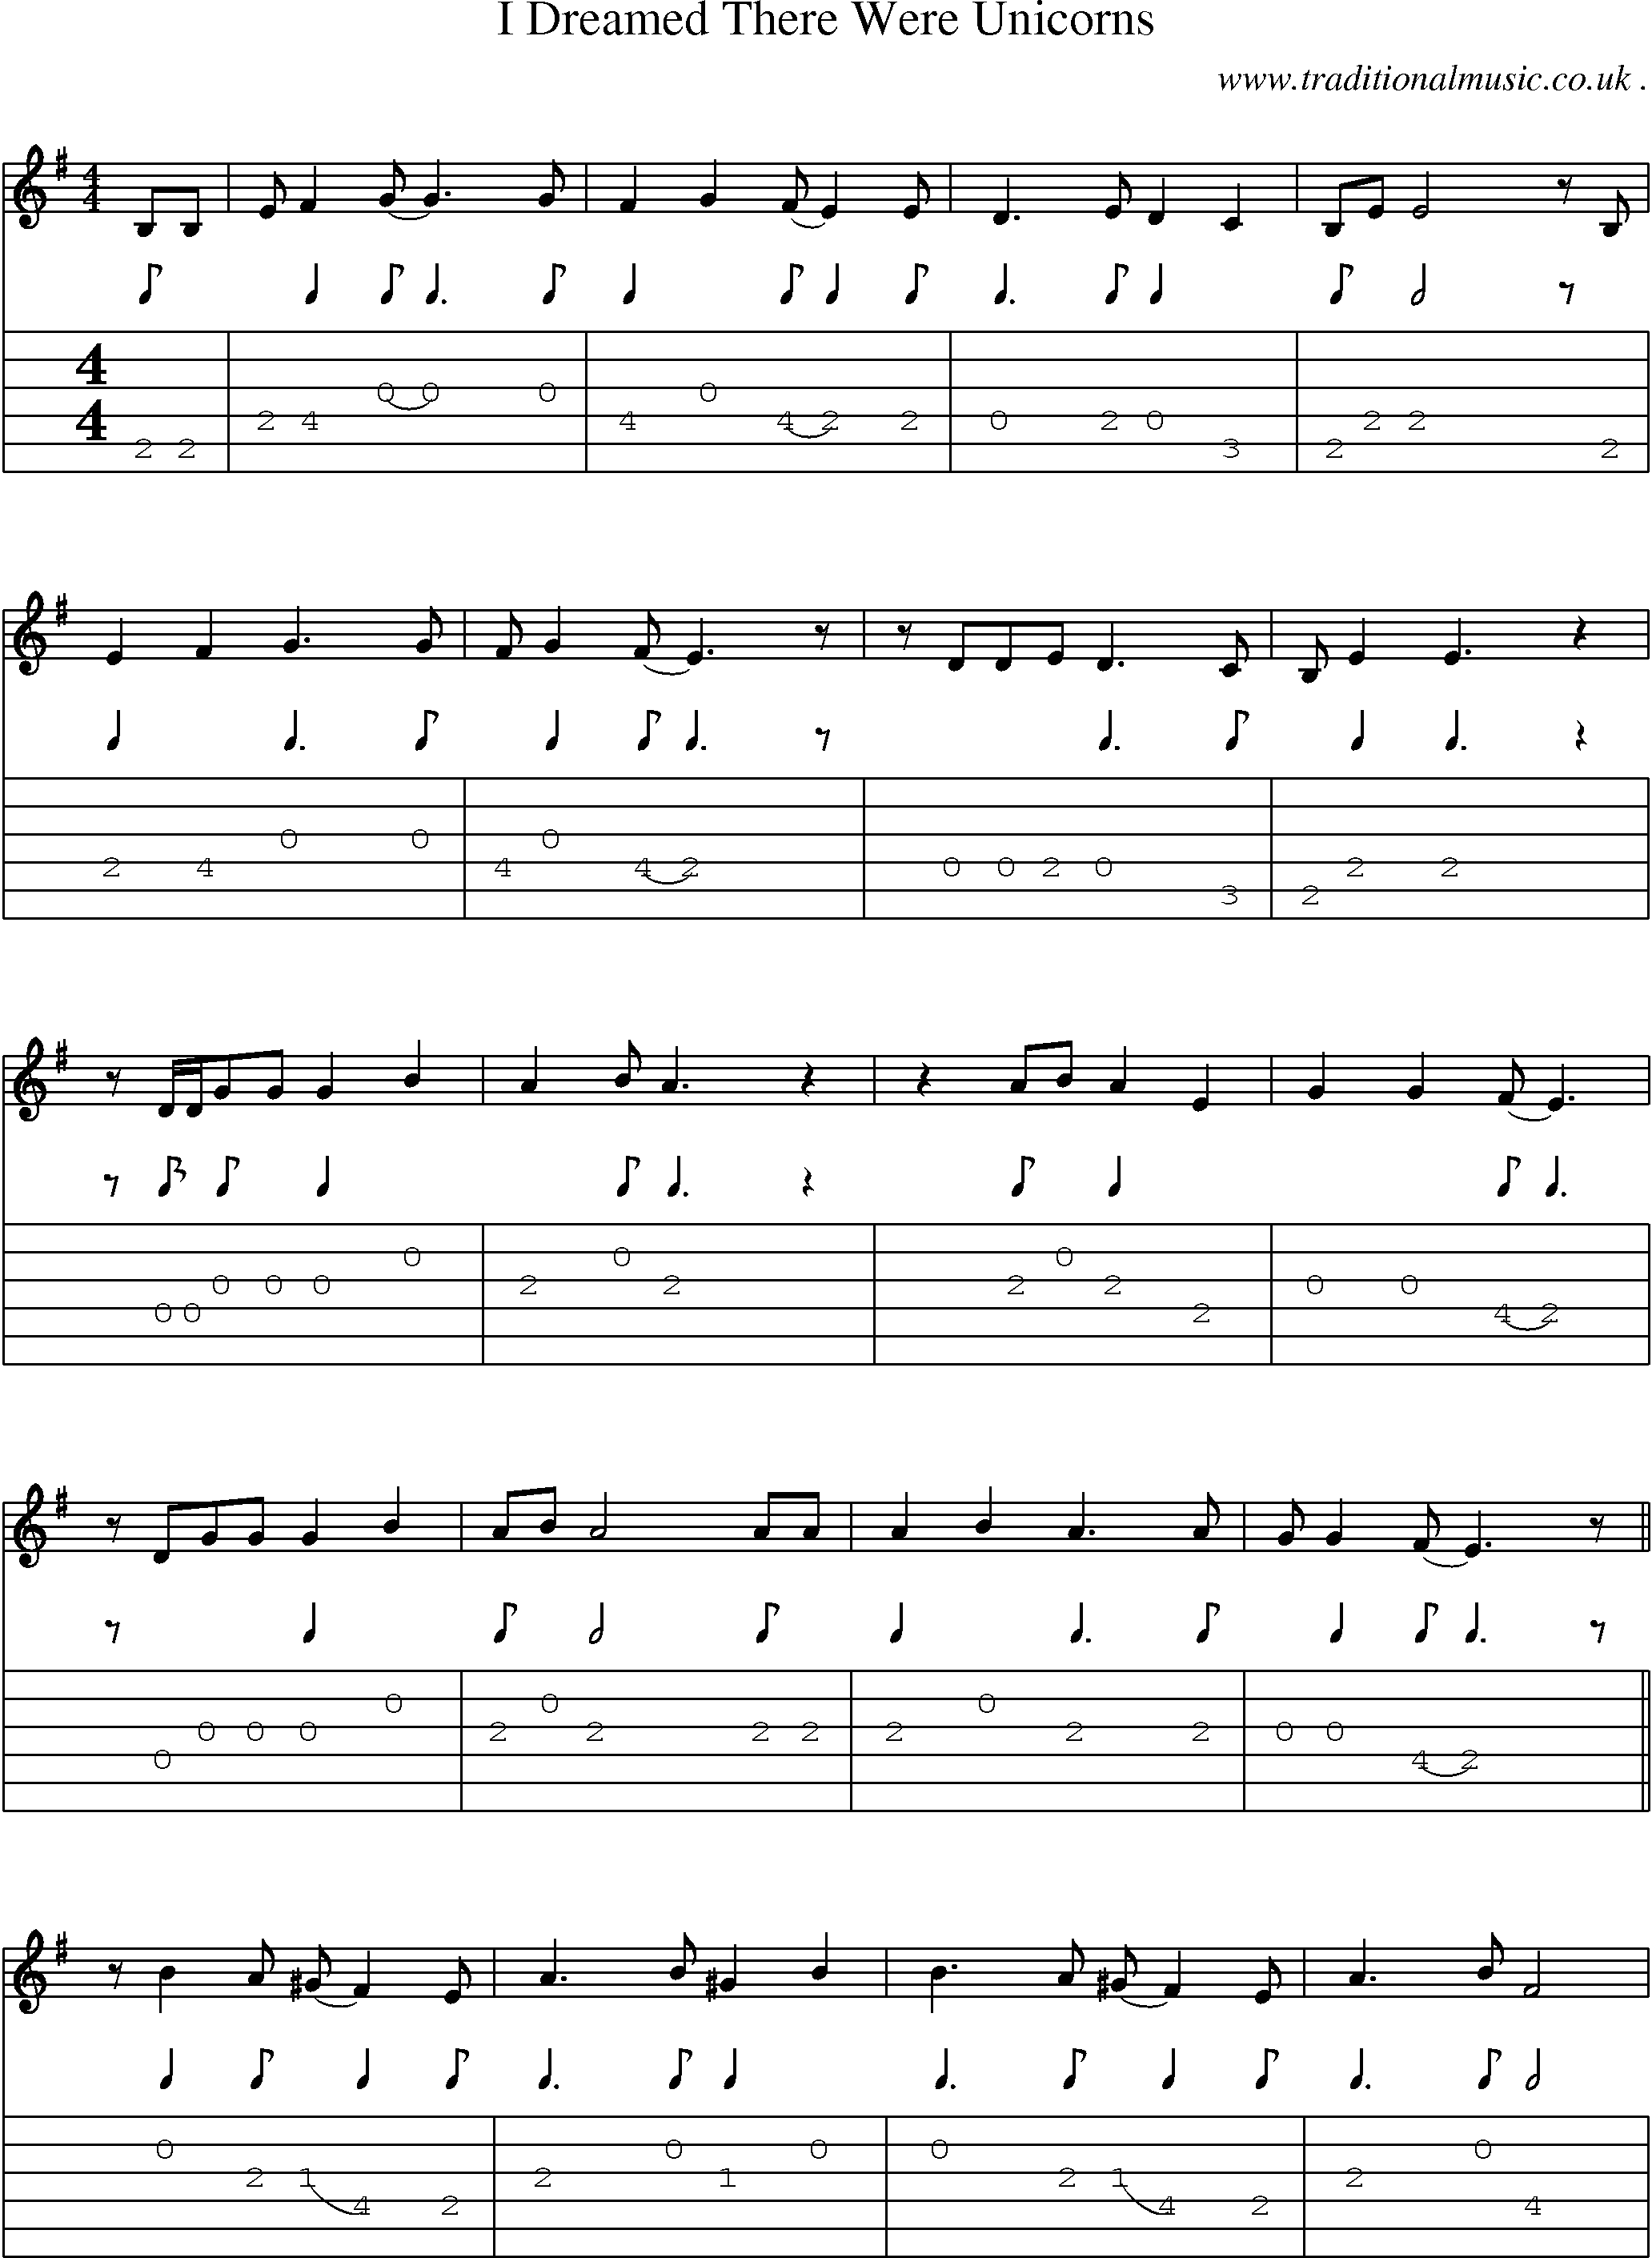 Sheet-Music and Guitar Tabs for I Dreamed There Were Unicorns